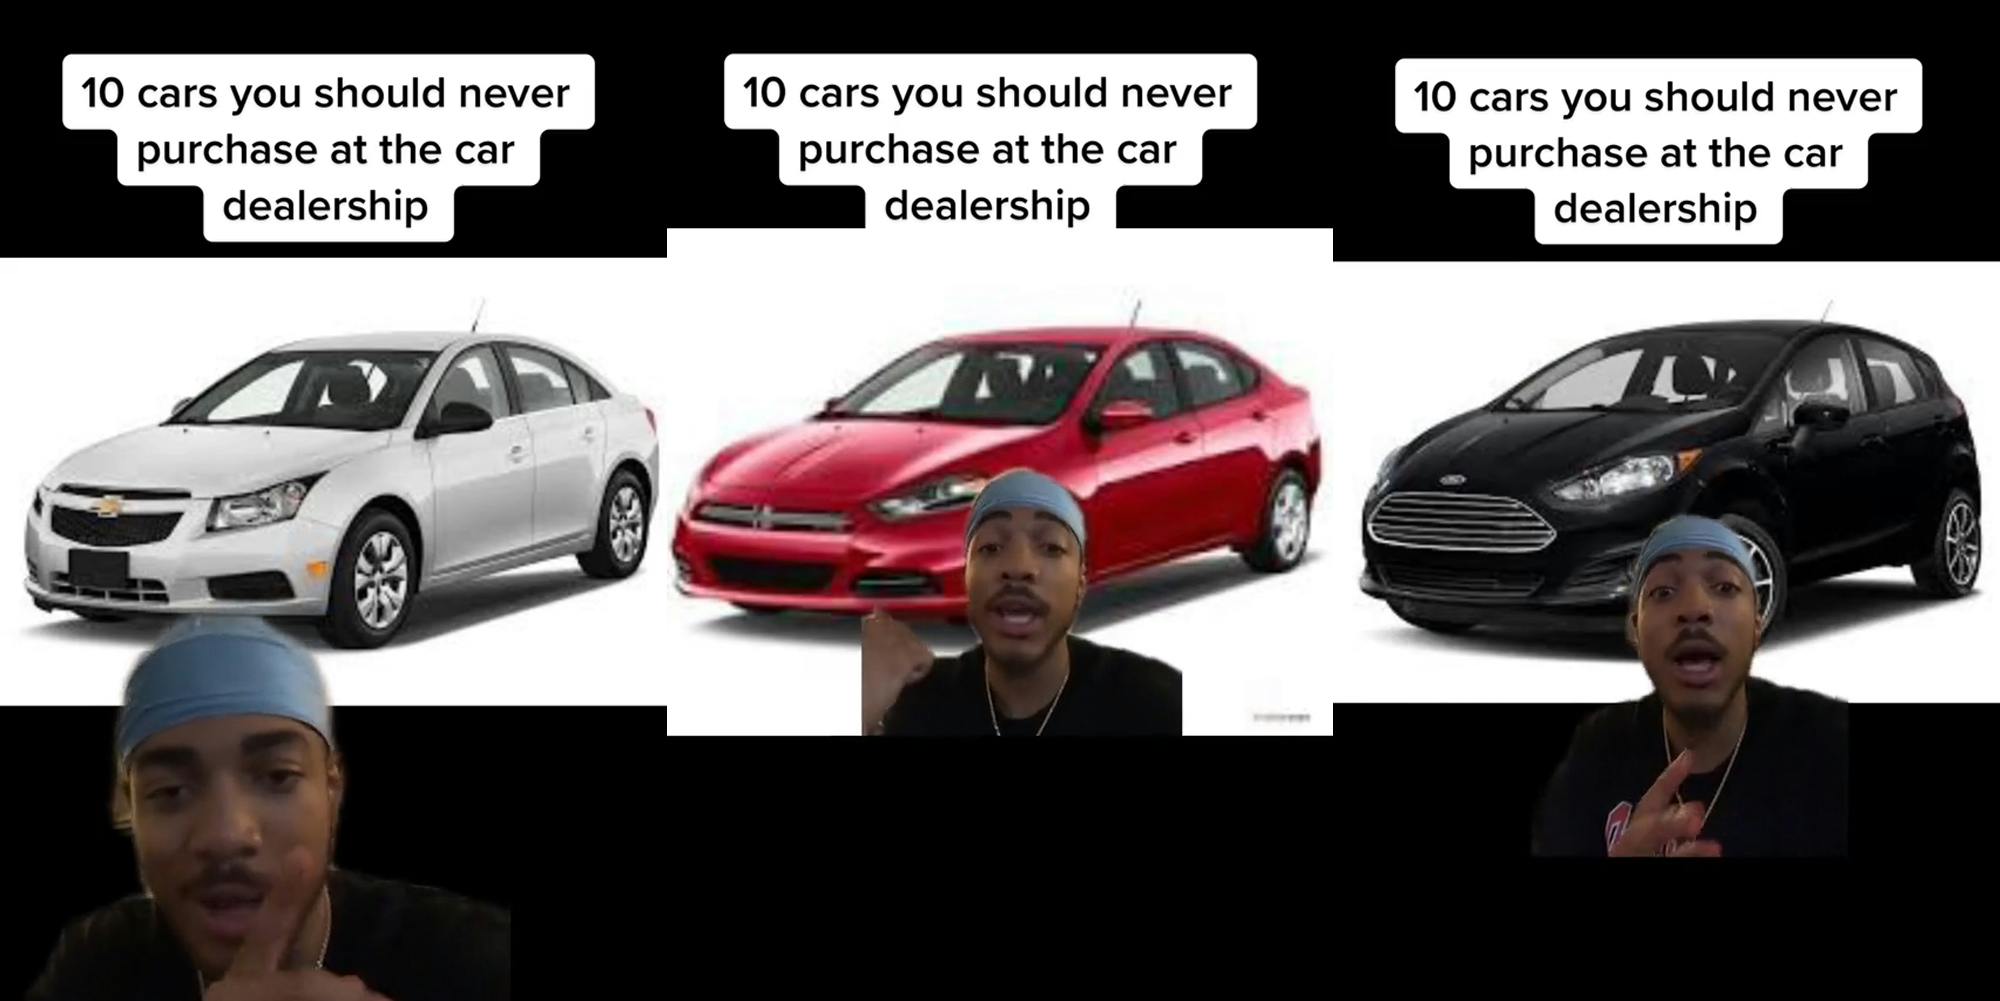 car seller greenscreen TikTok over image of Chevy Cruise with caption "10 cars you should never purchase at the car dealership" (l) car seller greenscreen TikTok over image of Dodge Dart with caption "10 cars you should never purchase at the car dealership" (c) car seller greenscreen TikTok over image of Ford Fiesta with caption "10 cars you should never purchase at the car dealership" (r)